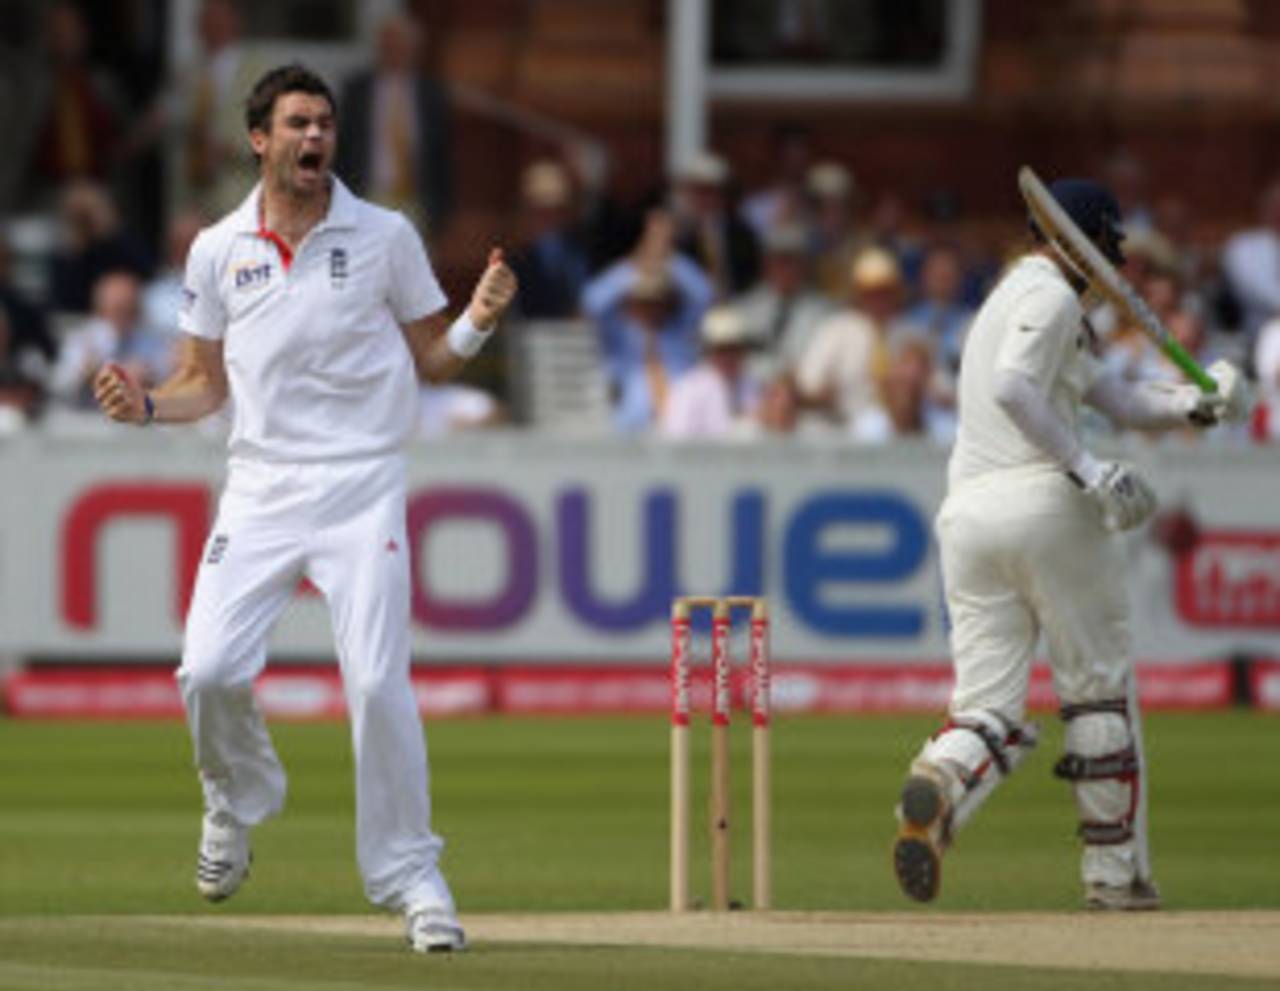 James Anderson is thrilled after removing Rahul Dravid, England v India, 1st Test, Lord's, 5th day, July 25, 2011